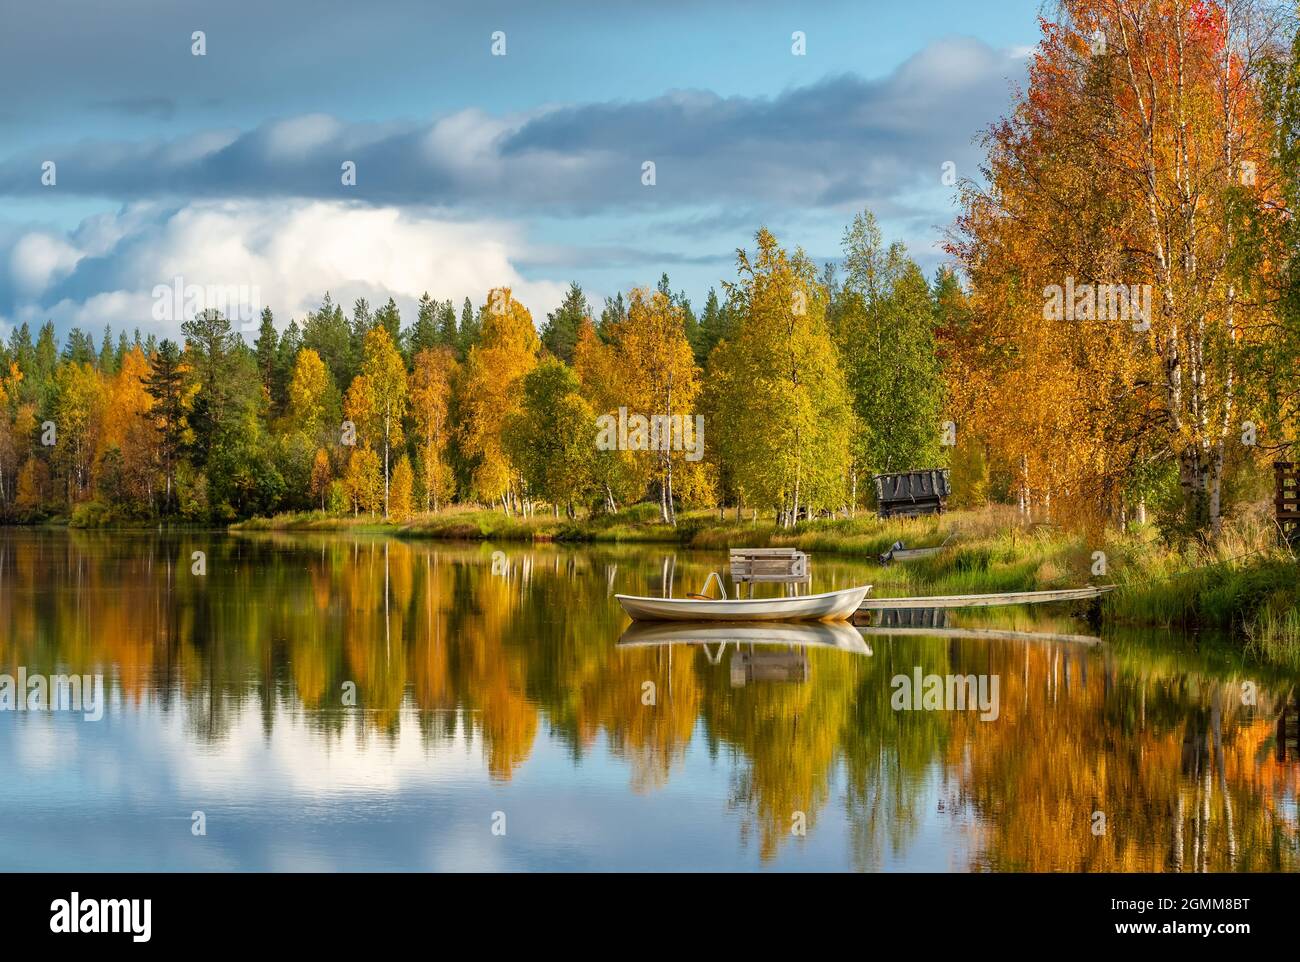 Calm water lake with a reflection of colorful autumn forest in Finland Stock Photo